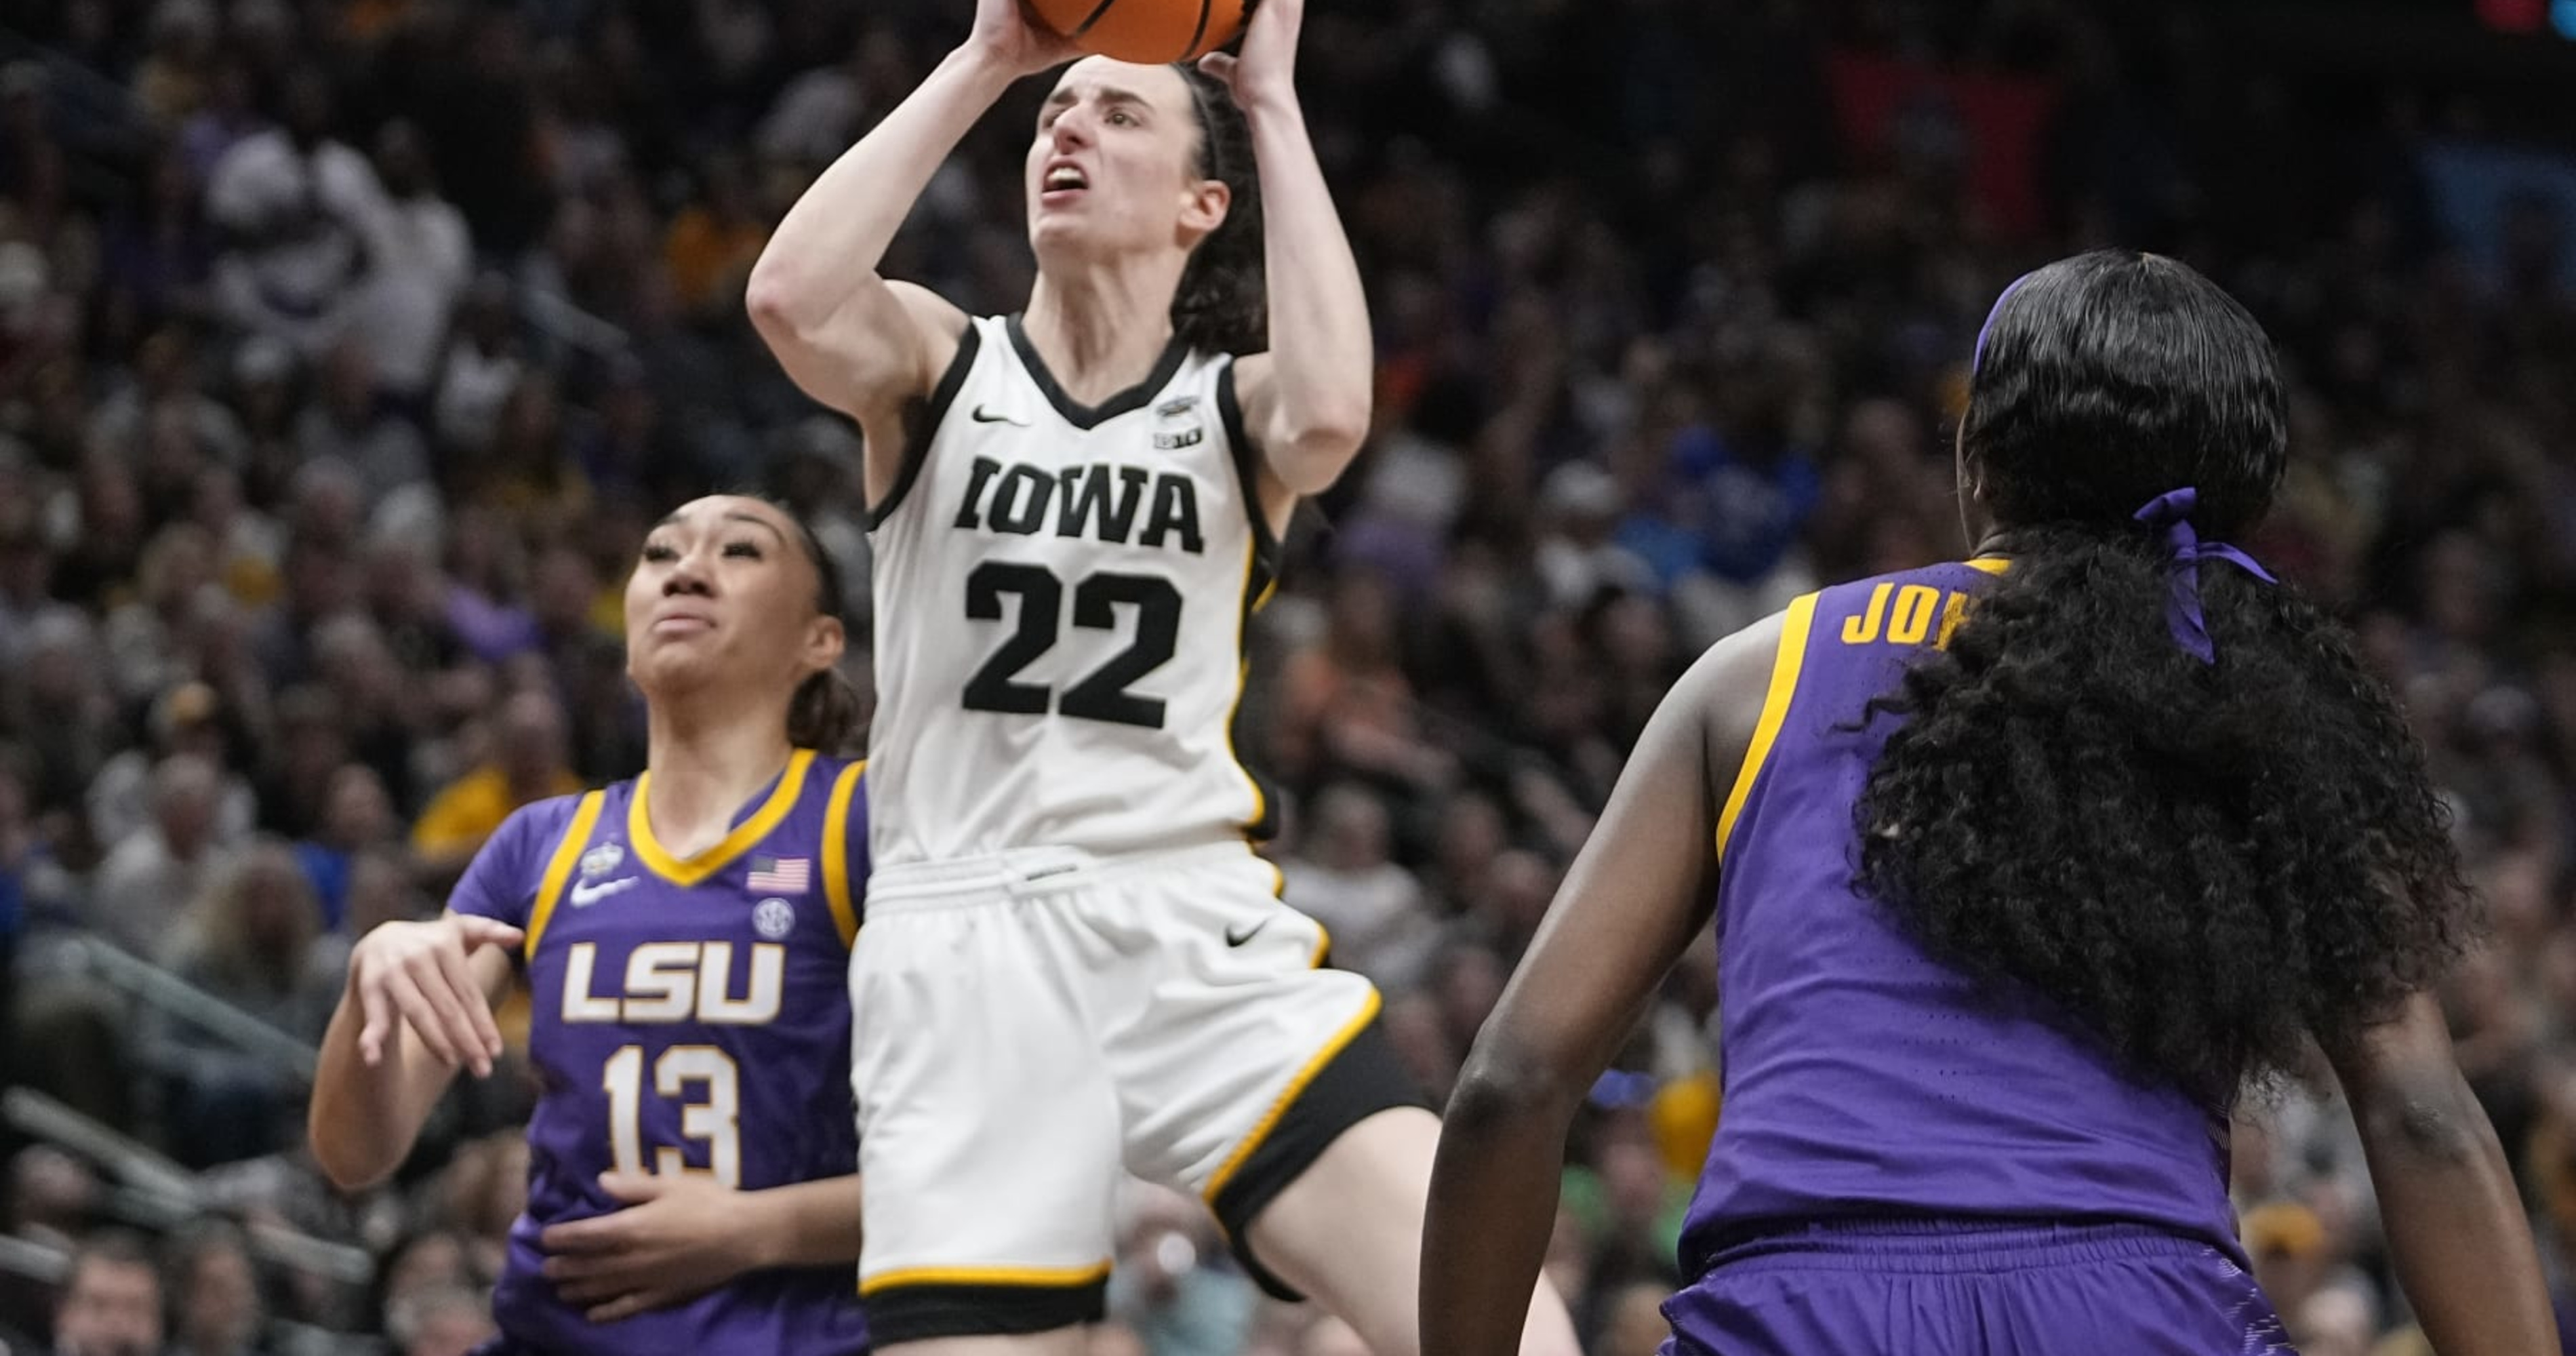 Caitlin Clark breaks records during historic March Madness run